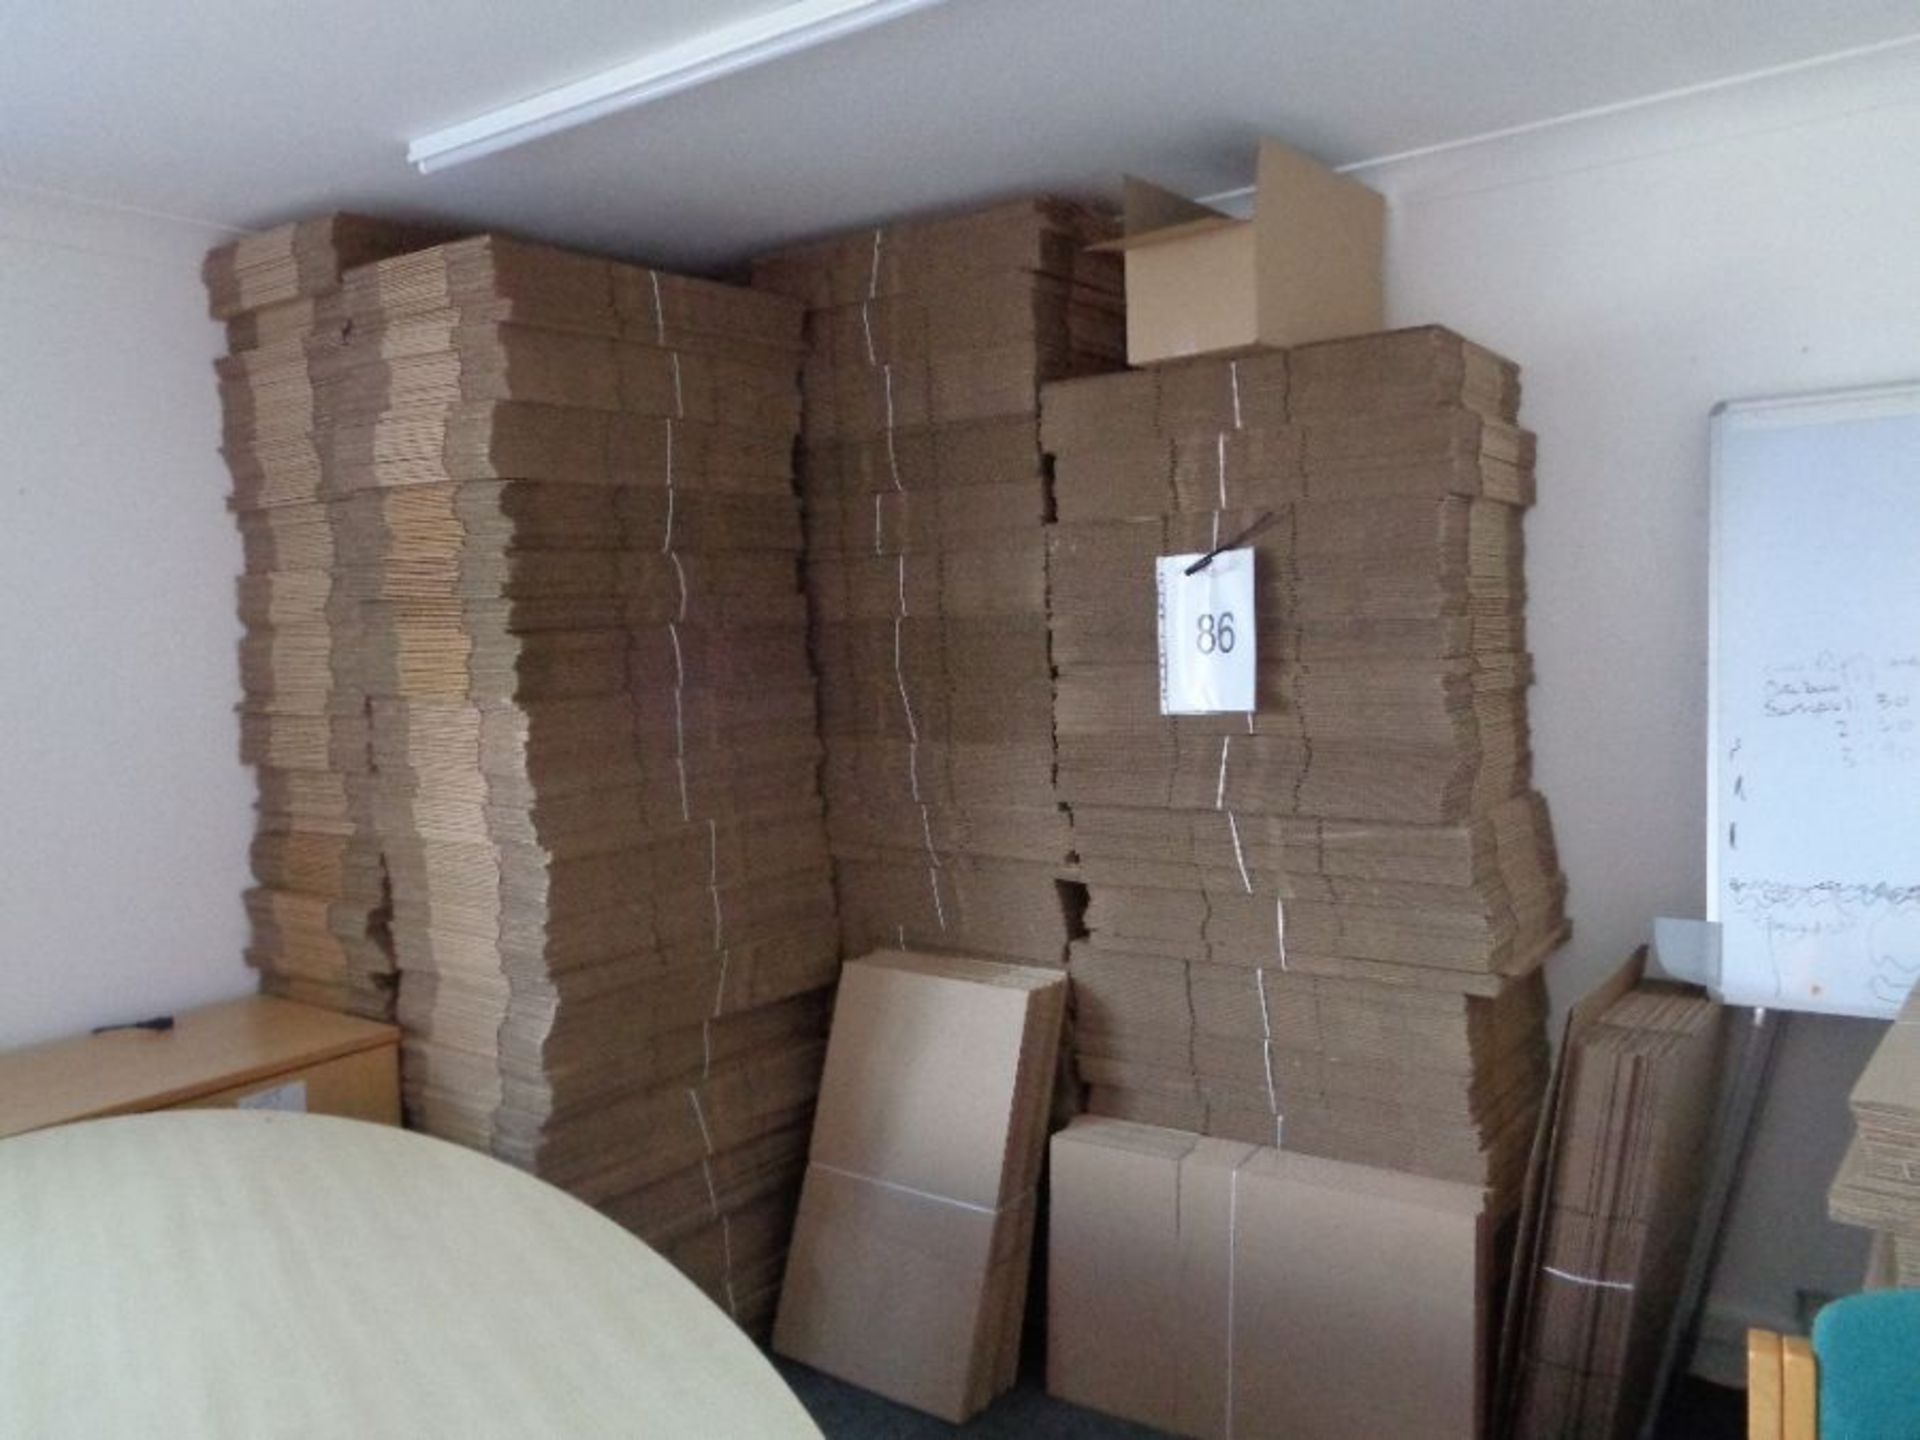 Quantity cardboard packaging as lotted